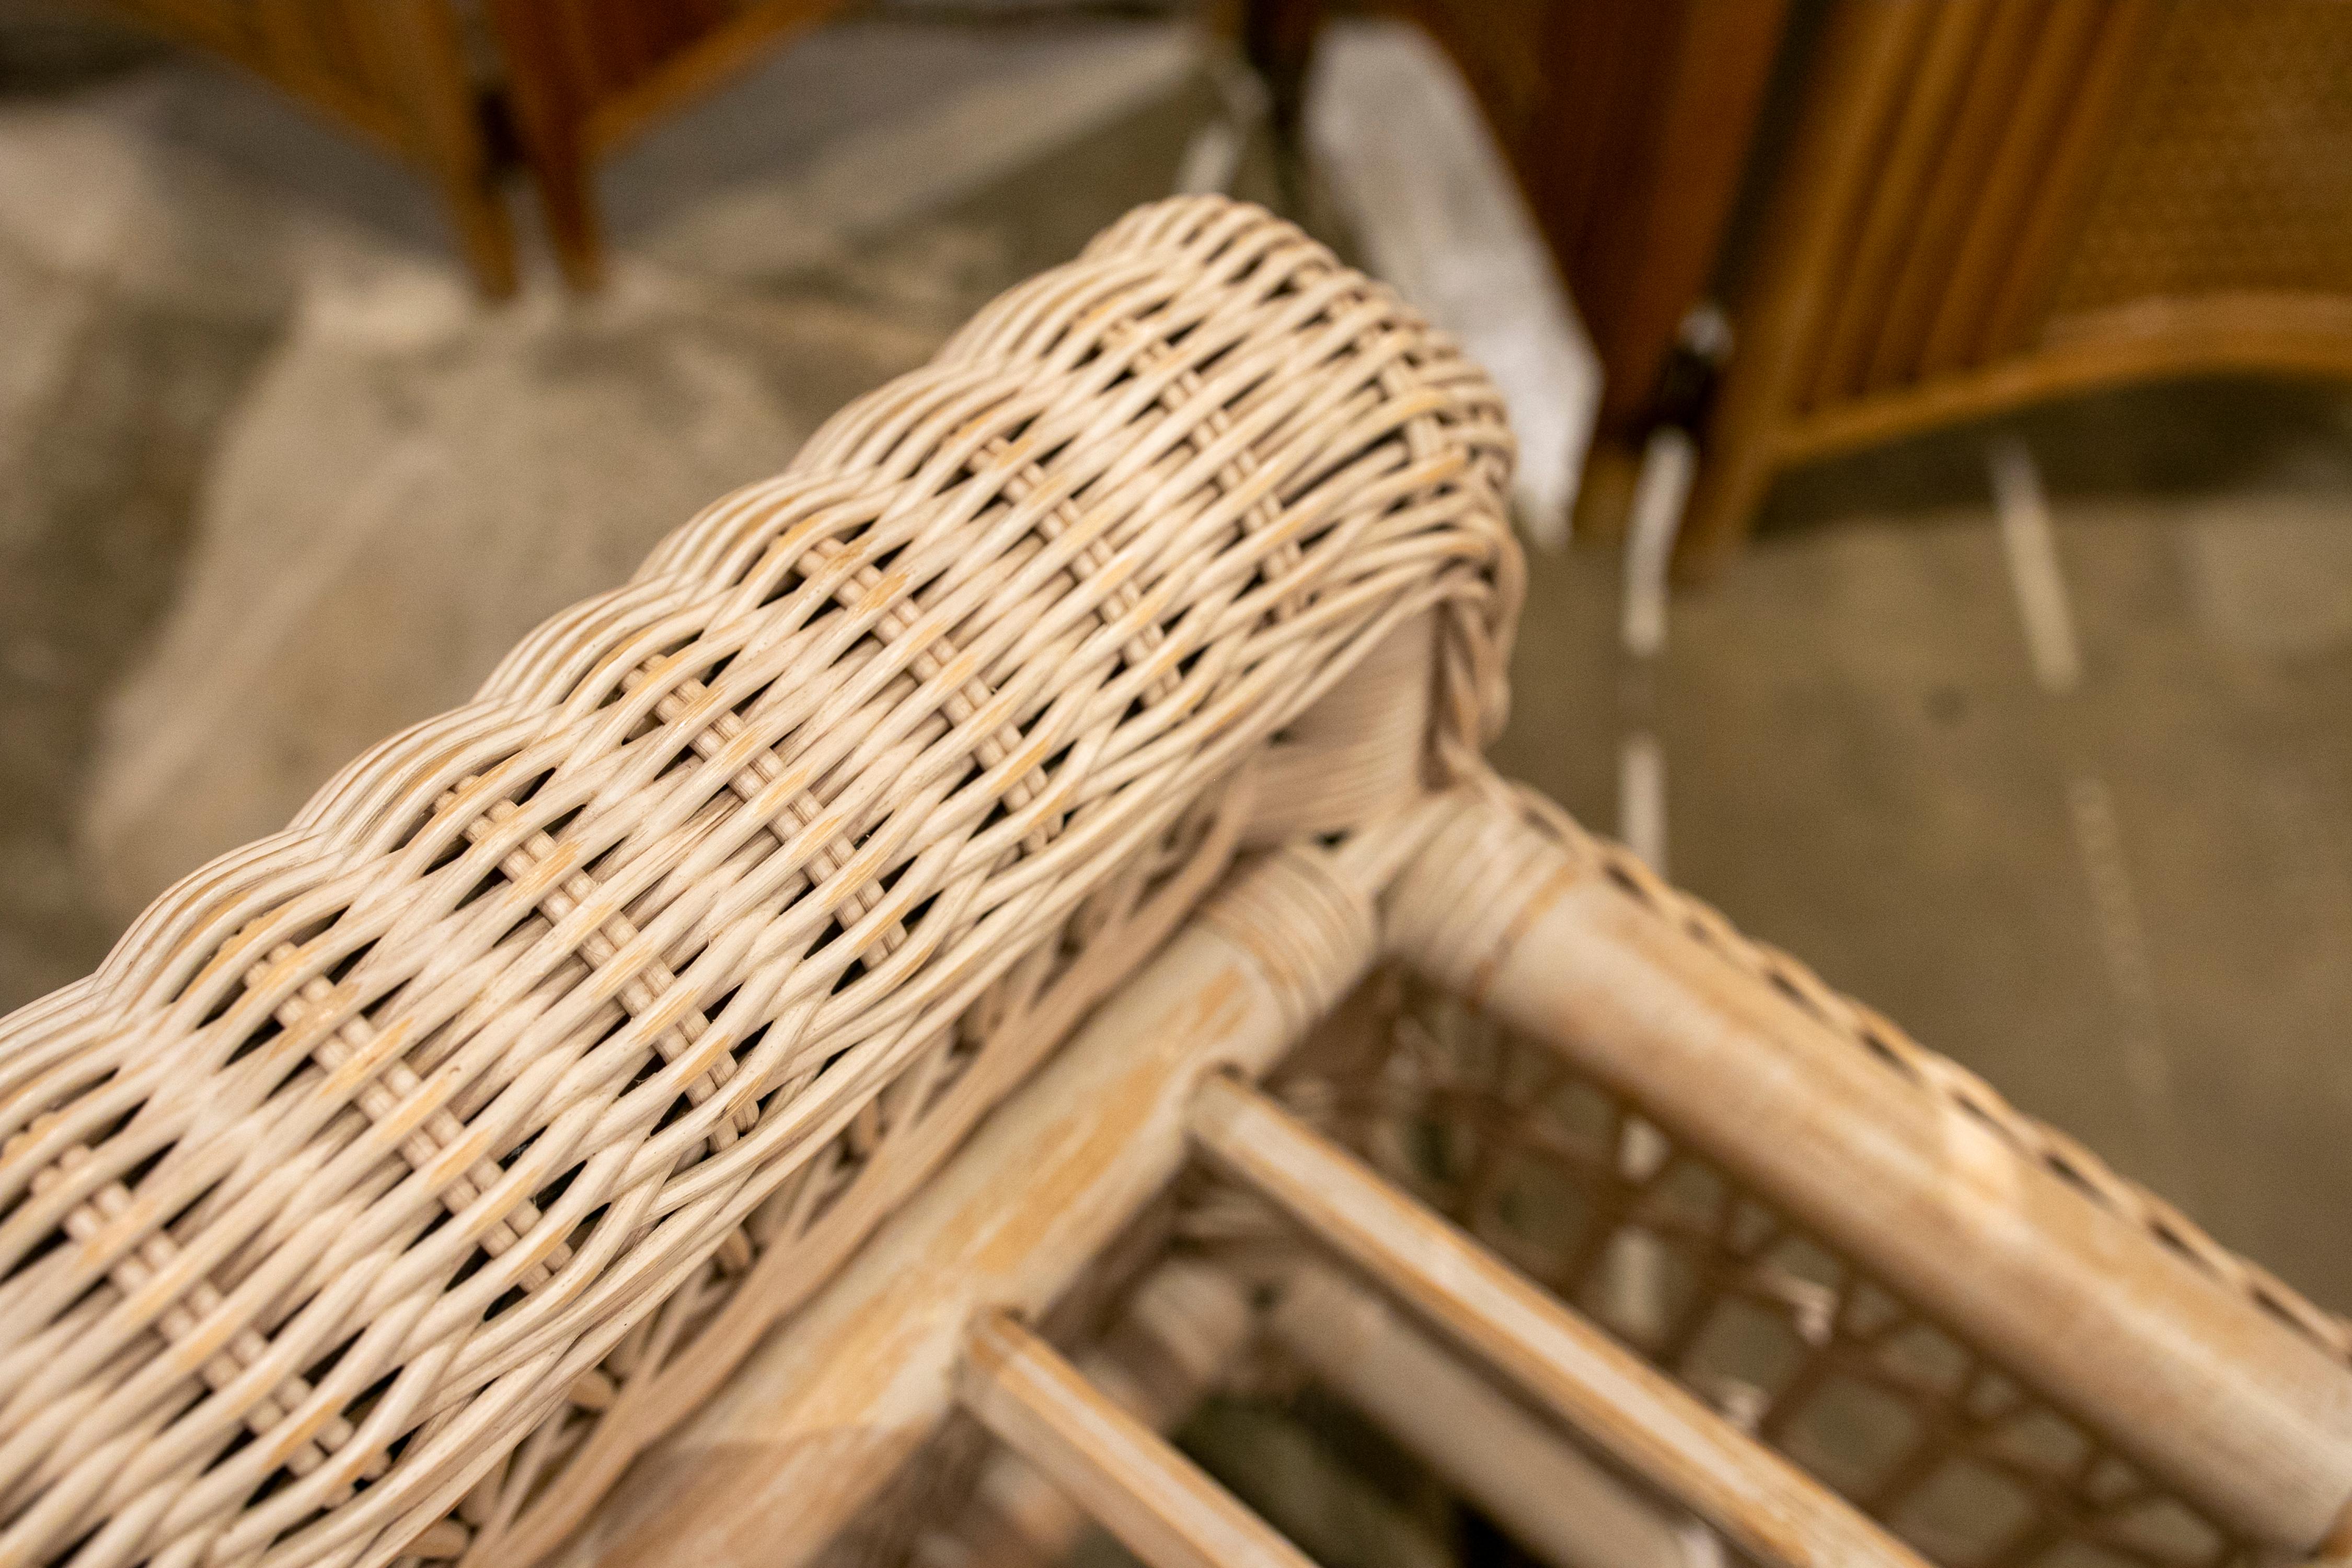 Handmade Bamboo and Wicker Stool Painted in White Colour 10